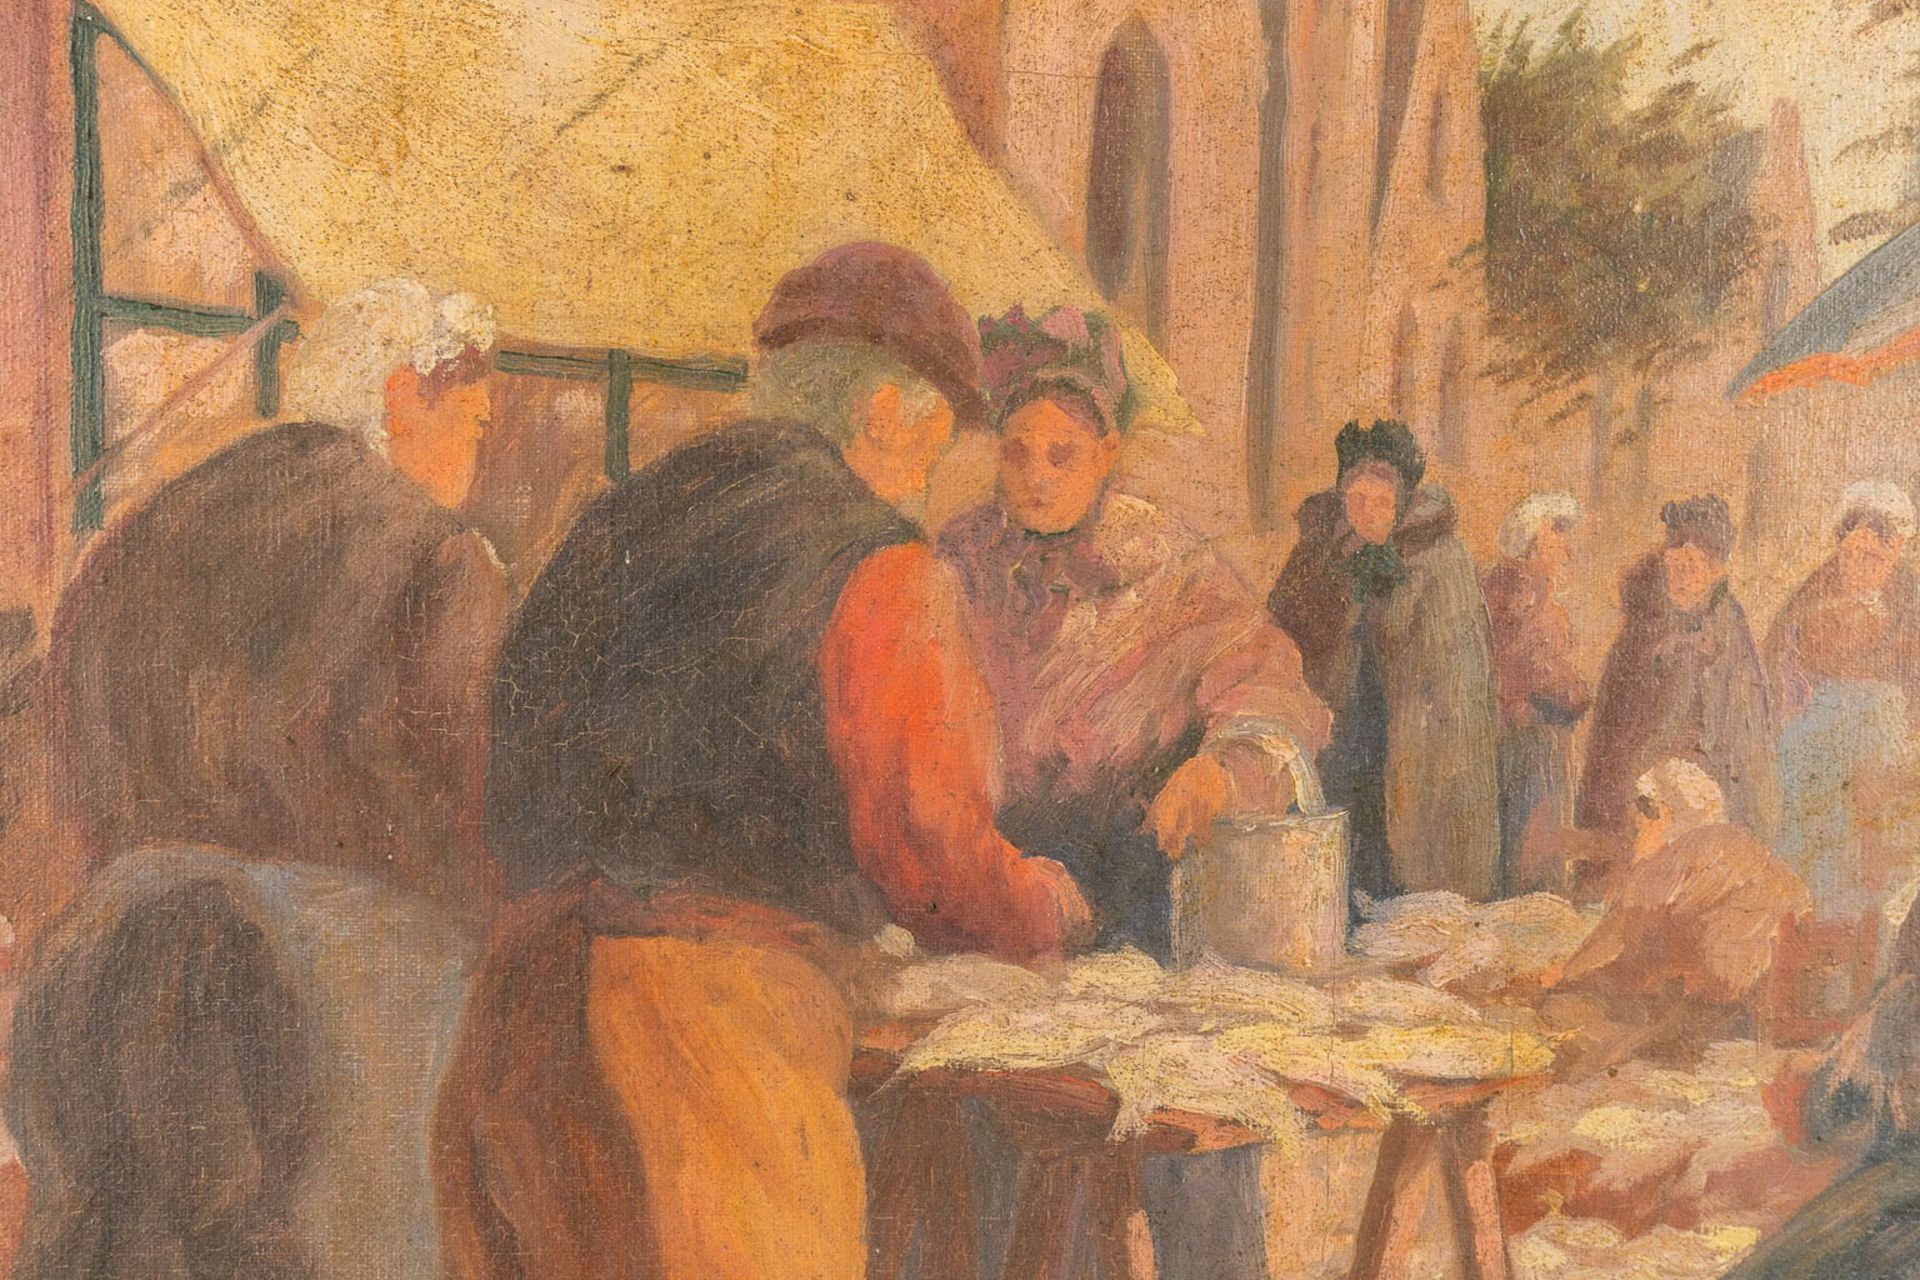 Charles POUPAERT (1874-1935) 'The Market' oil on canvas. (67 x 54cm) - Image 5 of 6